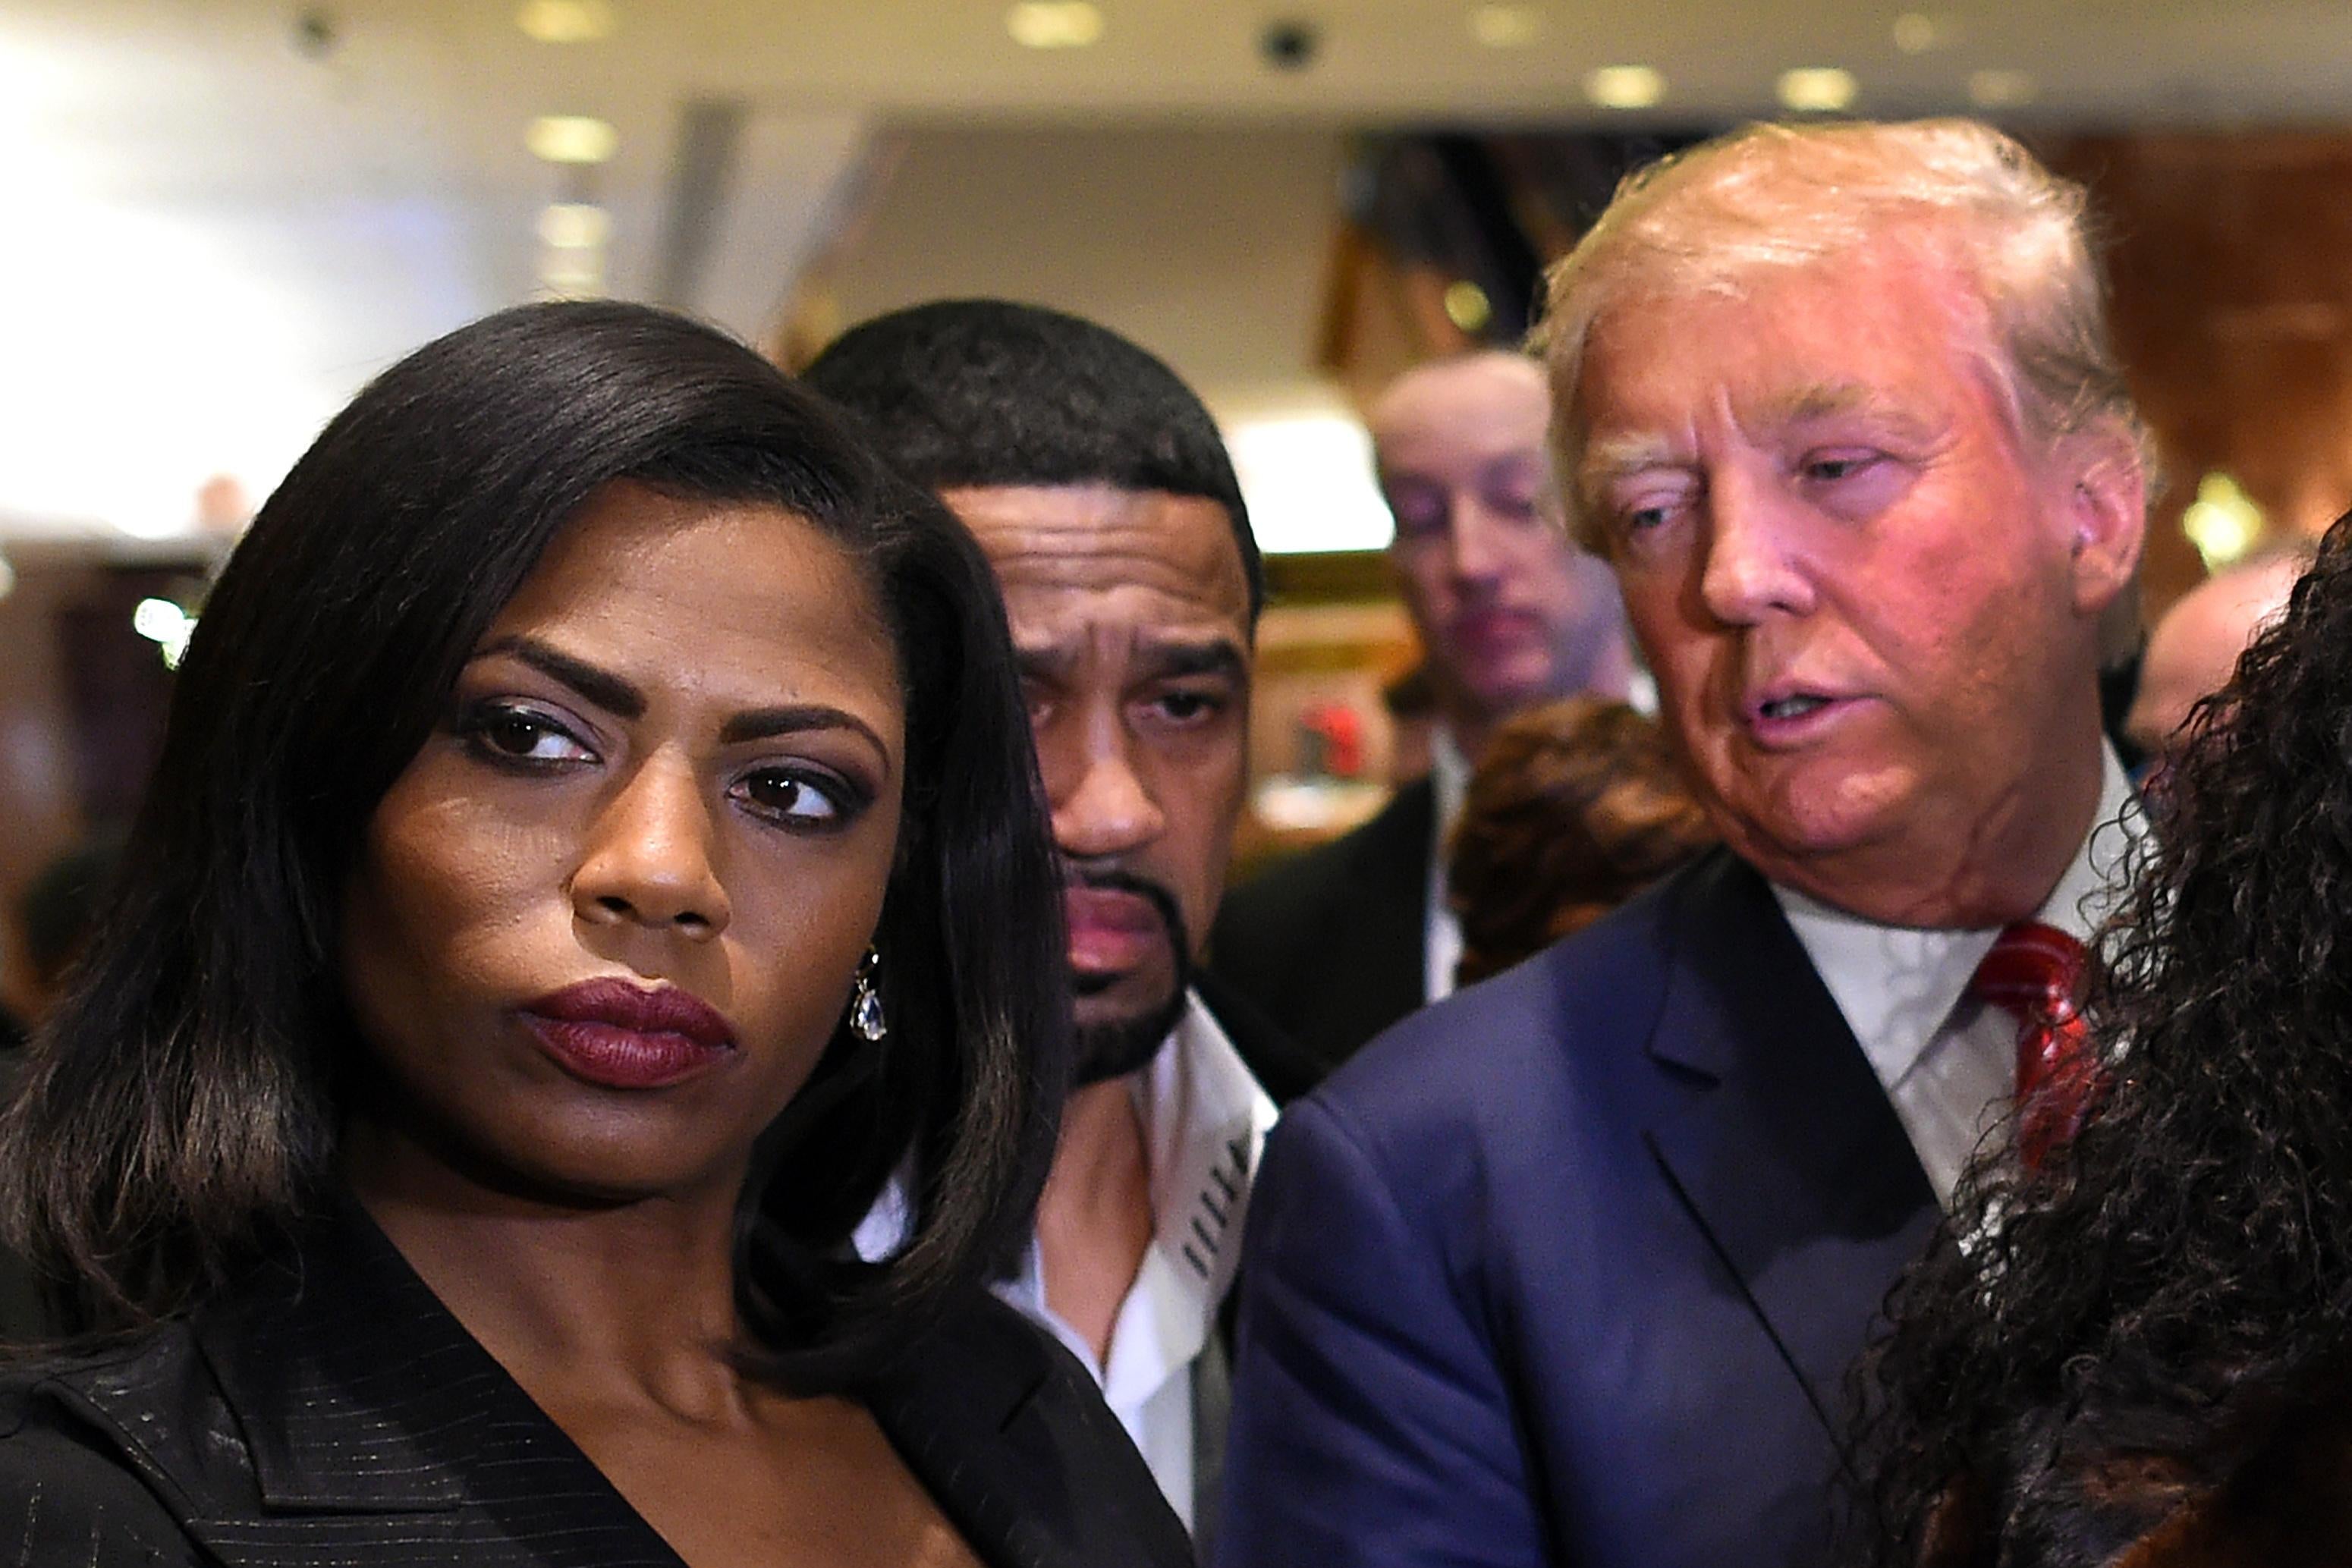 Omarosa Manigault and Donald Trump, among a crowd of people.